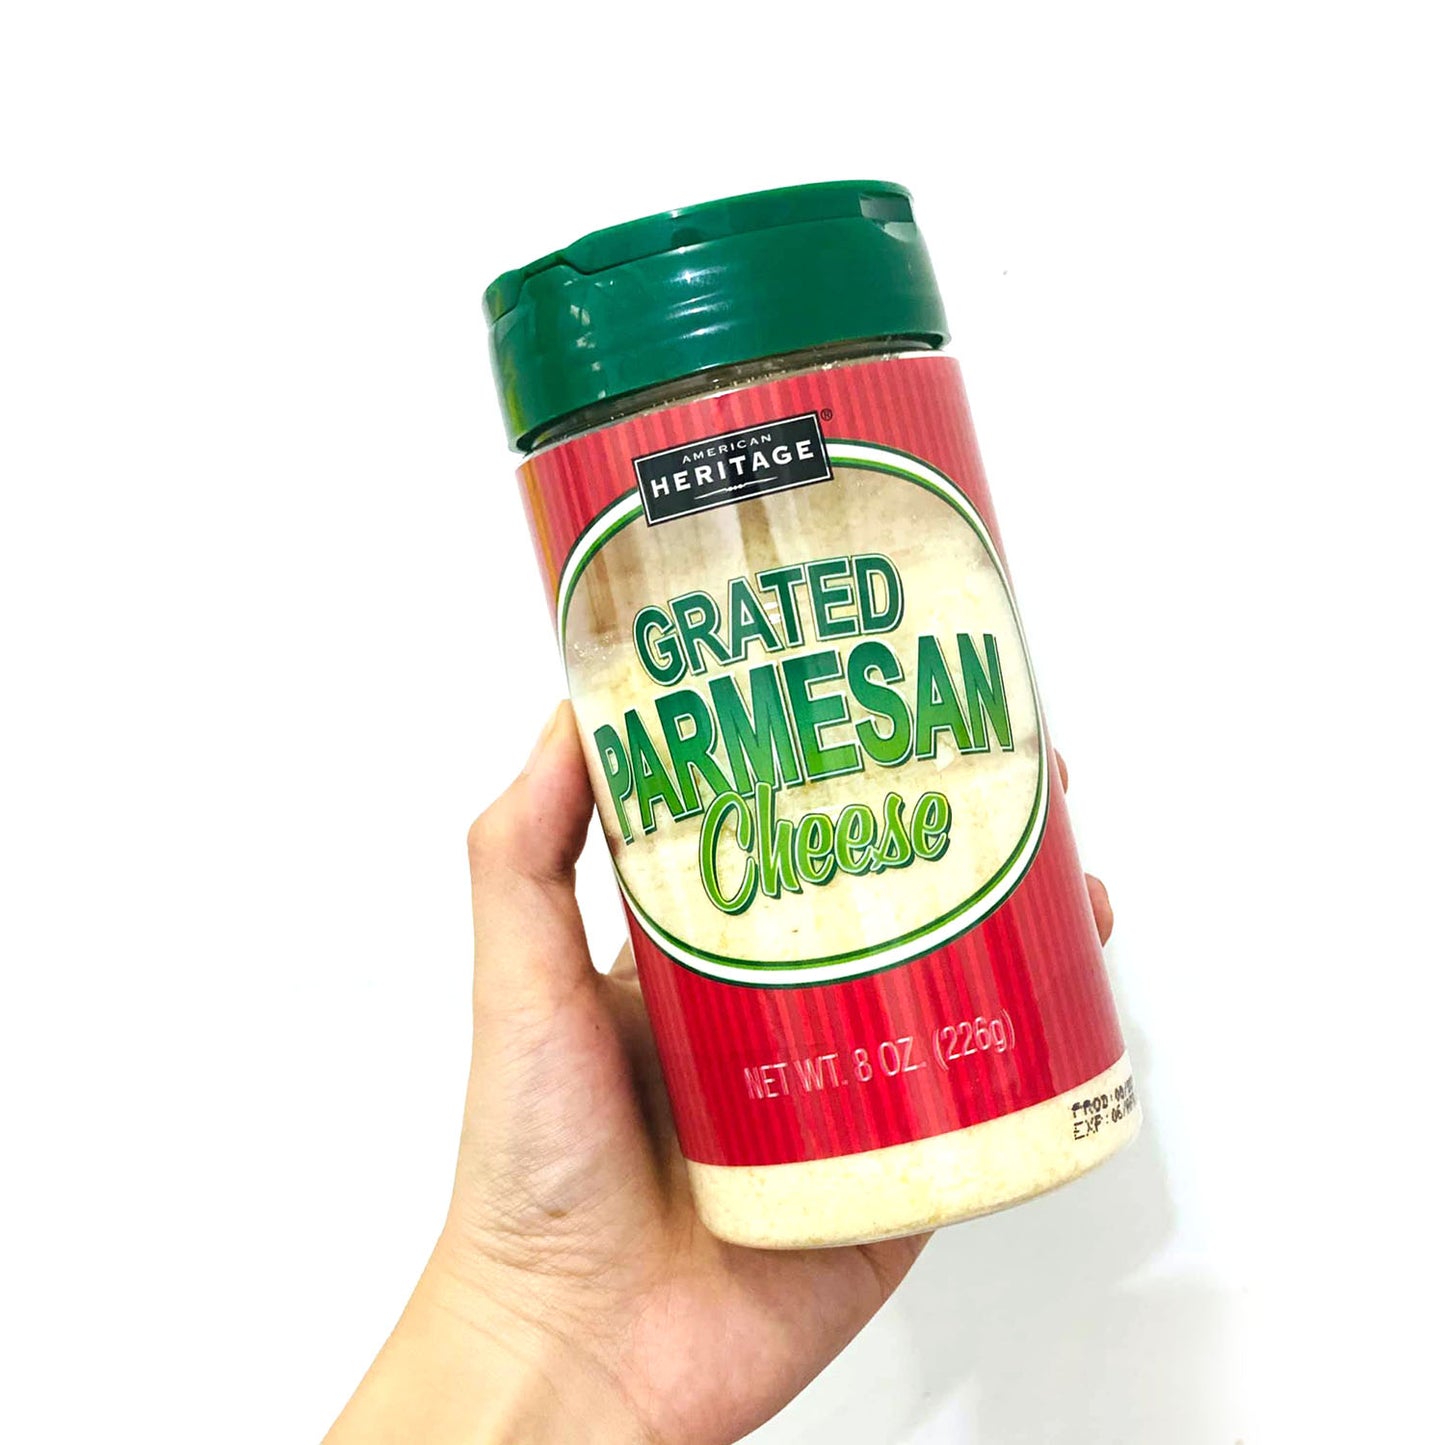 American Heritage Grated Parmesan Cheese, 227gm